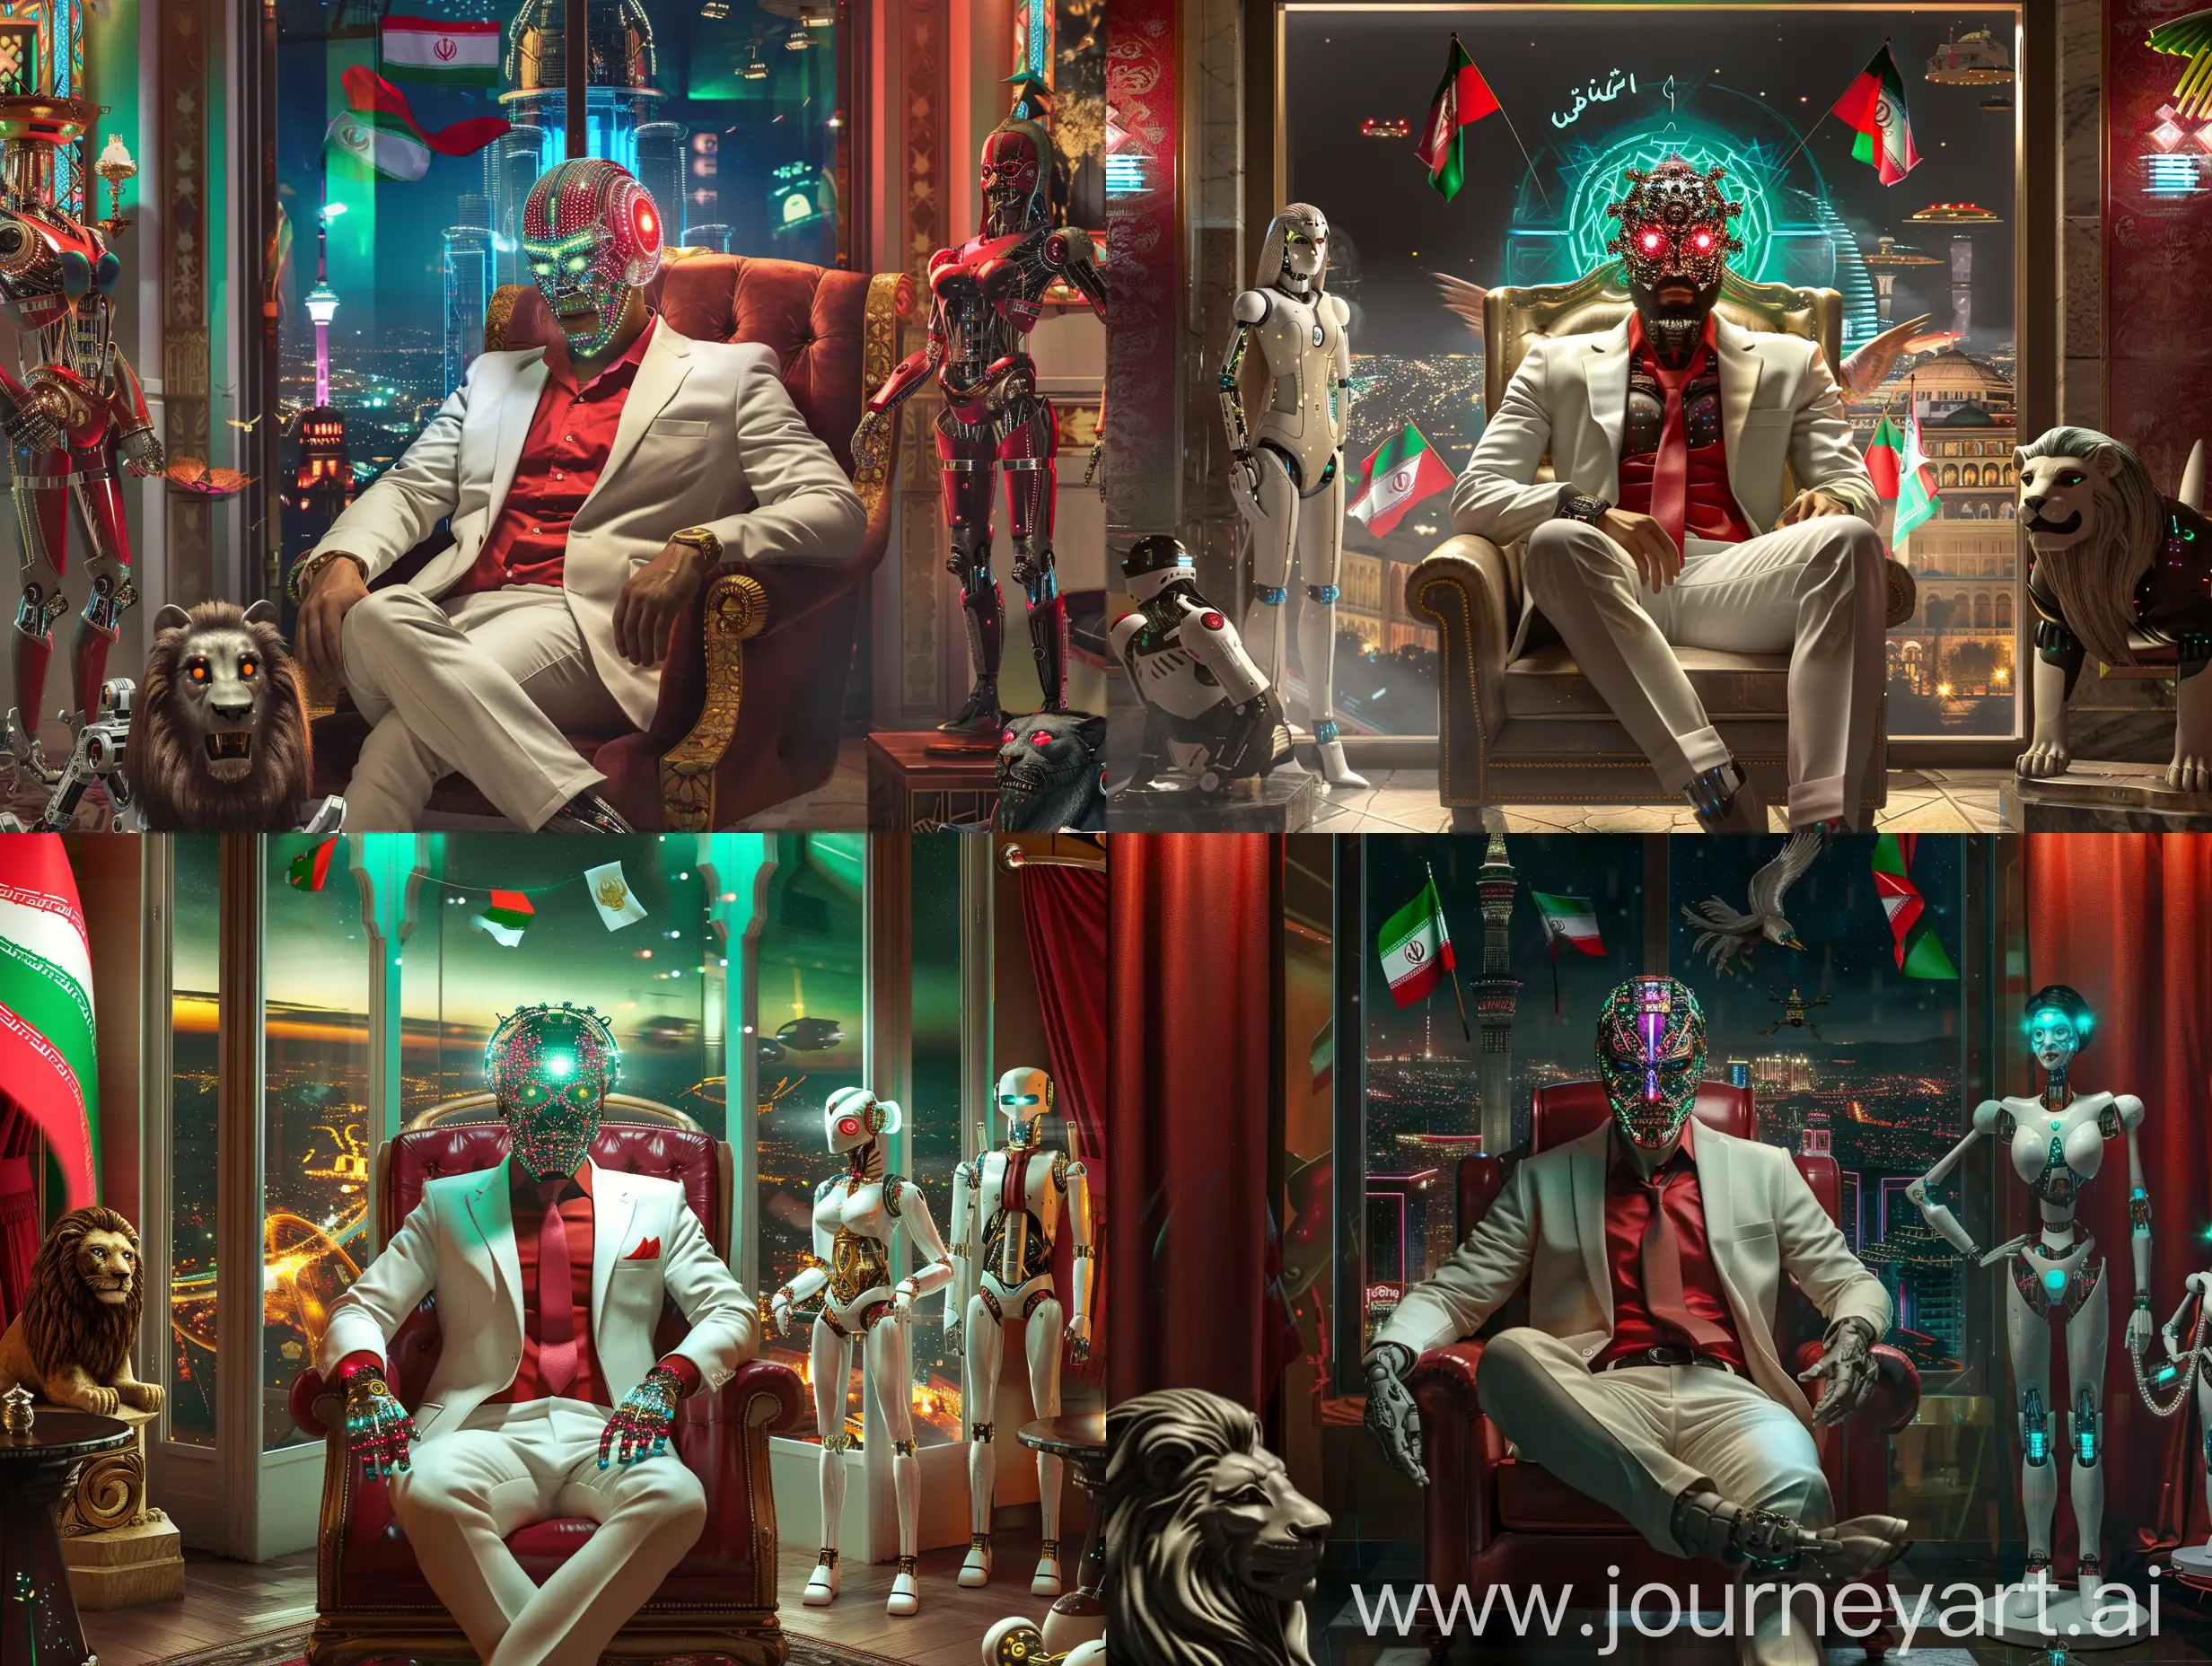 A sci-fi utopian futuristic scene of an opulent office, a cyborg human with cybernetics filled head and robot hands is sitting on his luxury chair with manly crossed legs, he is accompanied by his lady robot assistant a beautiful robotic woman who stands by the man, his face is filled with optical weirs and neon lights, he wears a white suit, red shirt under it, and a red tie, he is menacing like a mafia boss, yet calm like a wise man, he is young and powerful, a wealthy leader and company owner, a true nationalist, flags of red white and green adorn the room, statues of lions and Phoenix, while robots guard the room, Iranian style, Persian Empire, future photo, detailed, HD, 8k, quality picture, robotic head, Sci-fi Persian Room, Window open to an outside utopian city at night with neon light on buildings and cars flying, a true utopian.